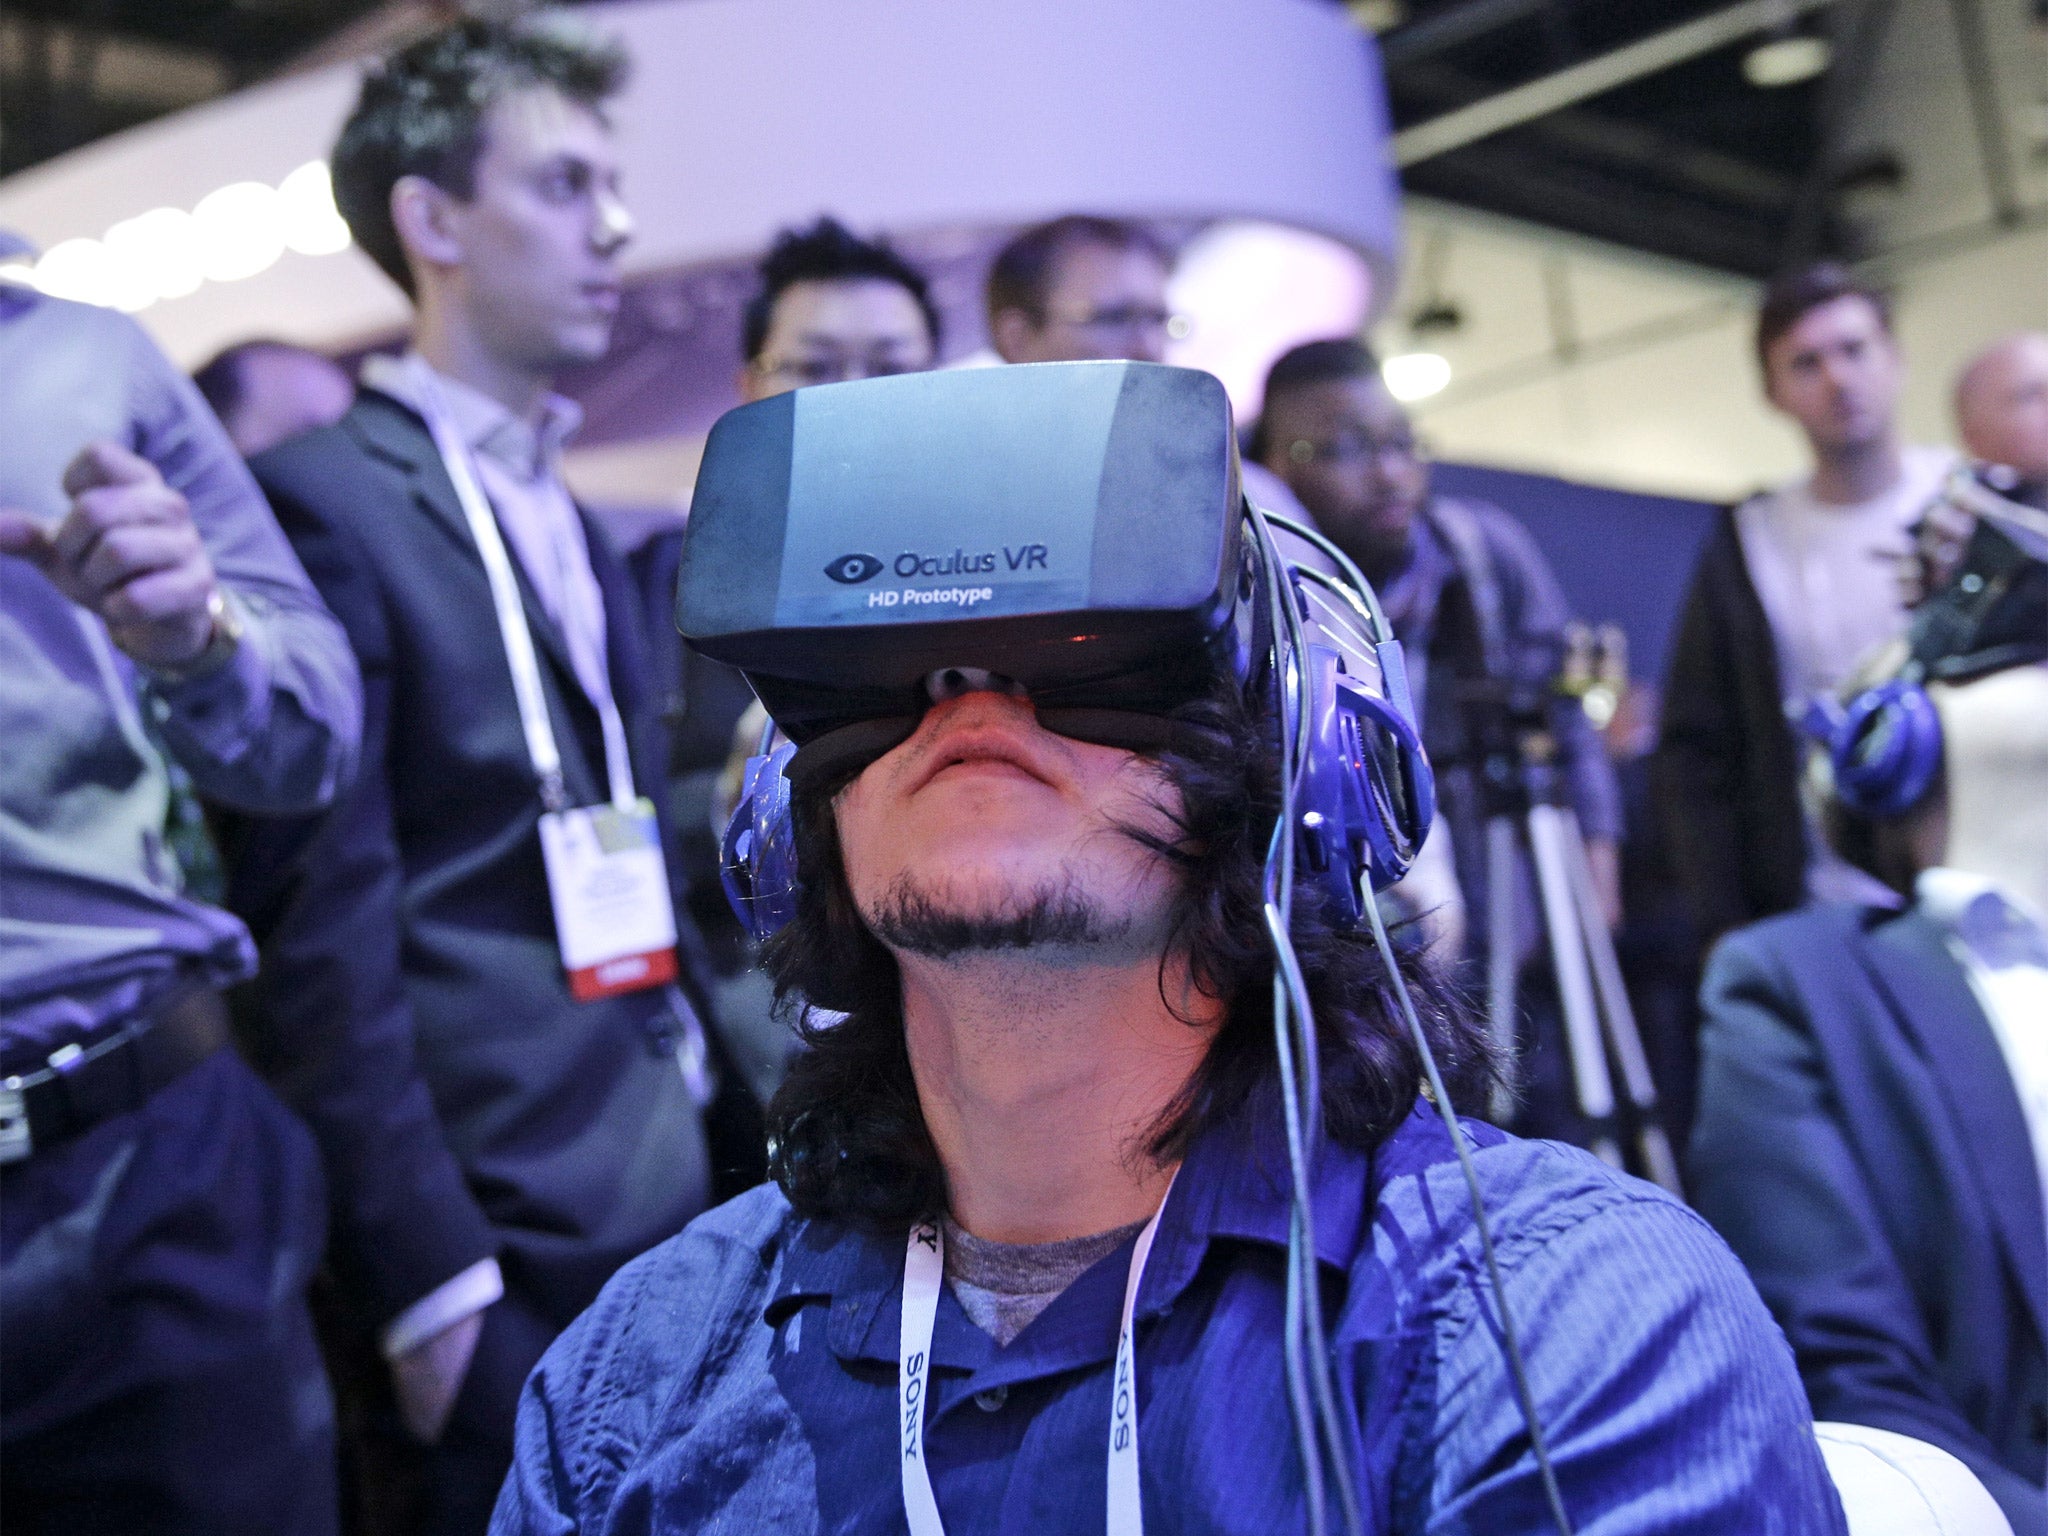 A man tries out a Oculus Rift virtual reality headset at the International Consumer Electronics Show (CES) in Las Vegas earlier this year